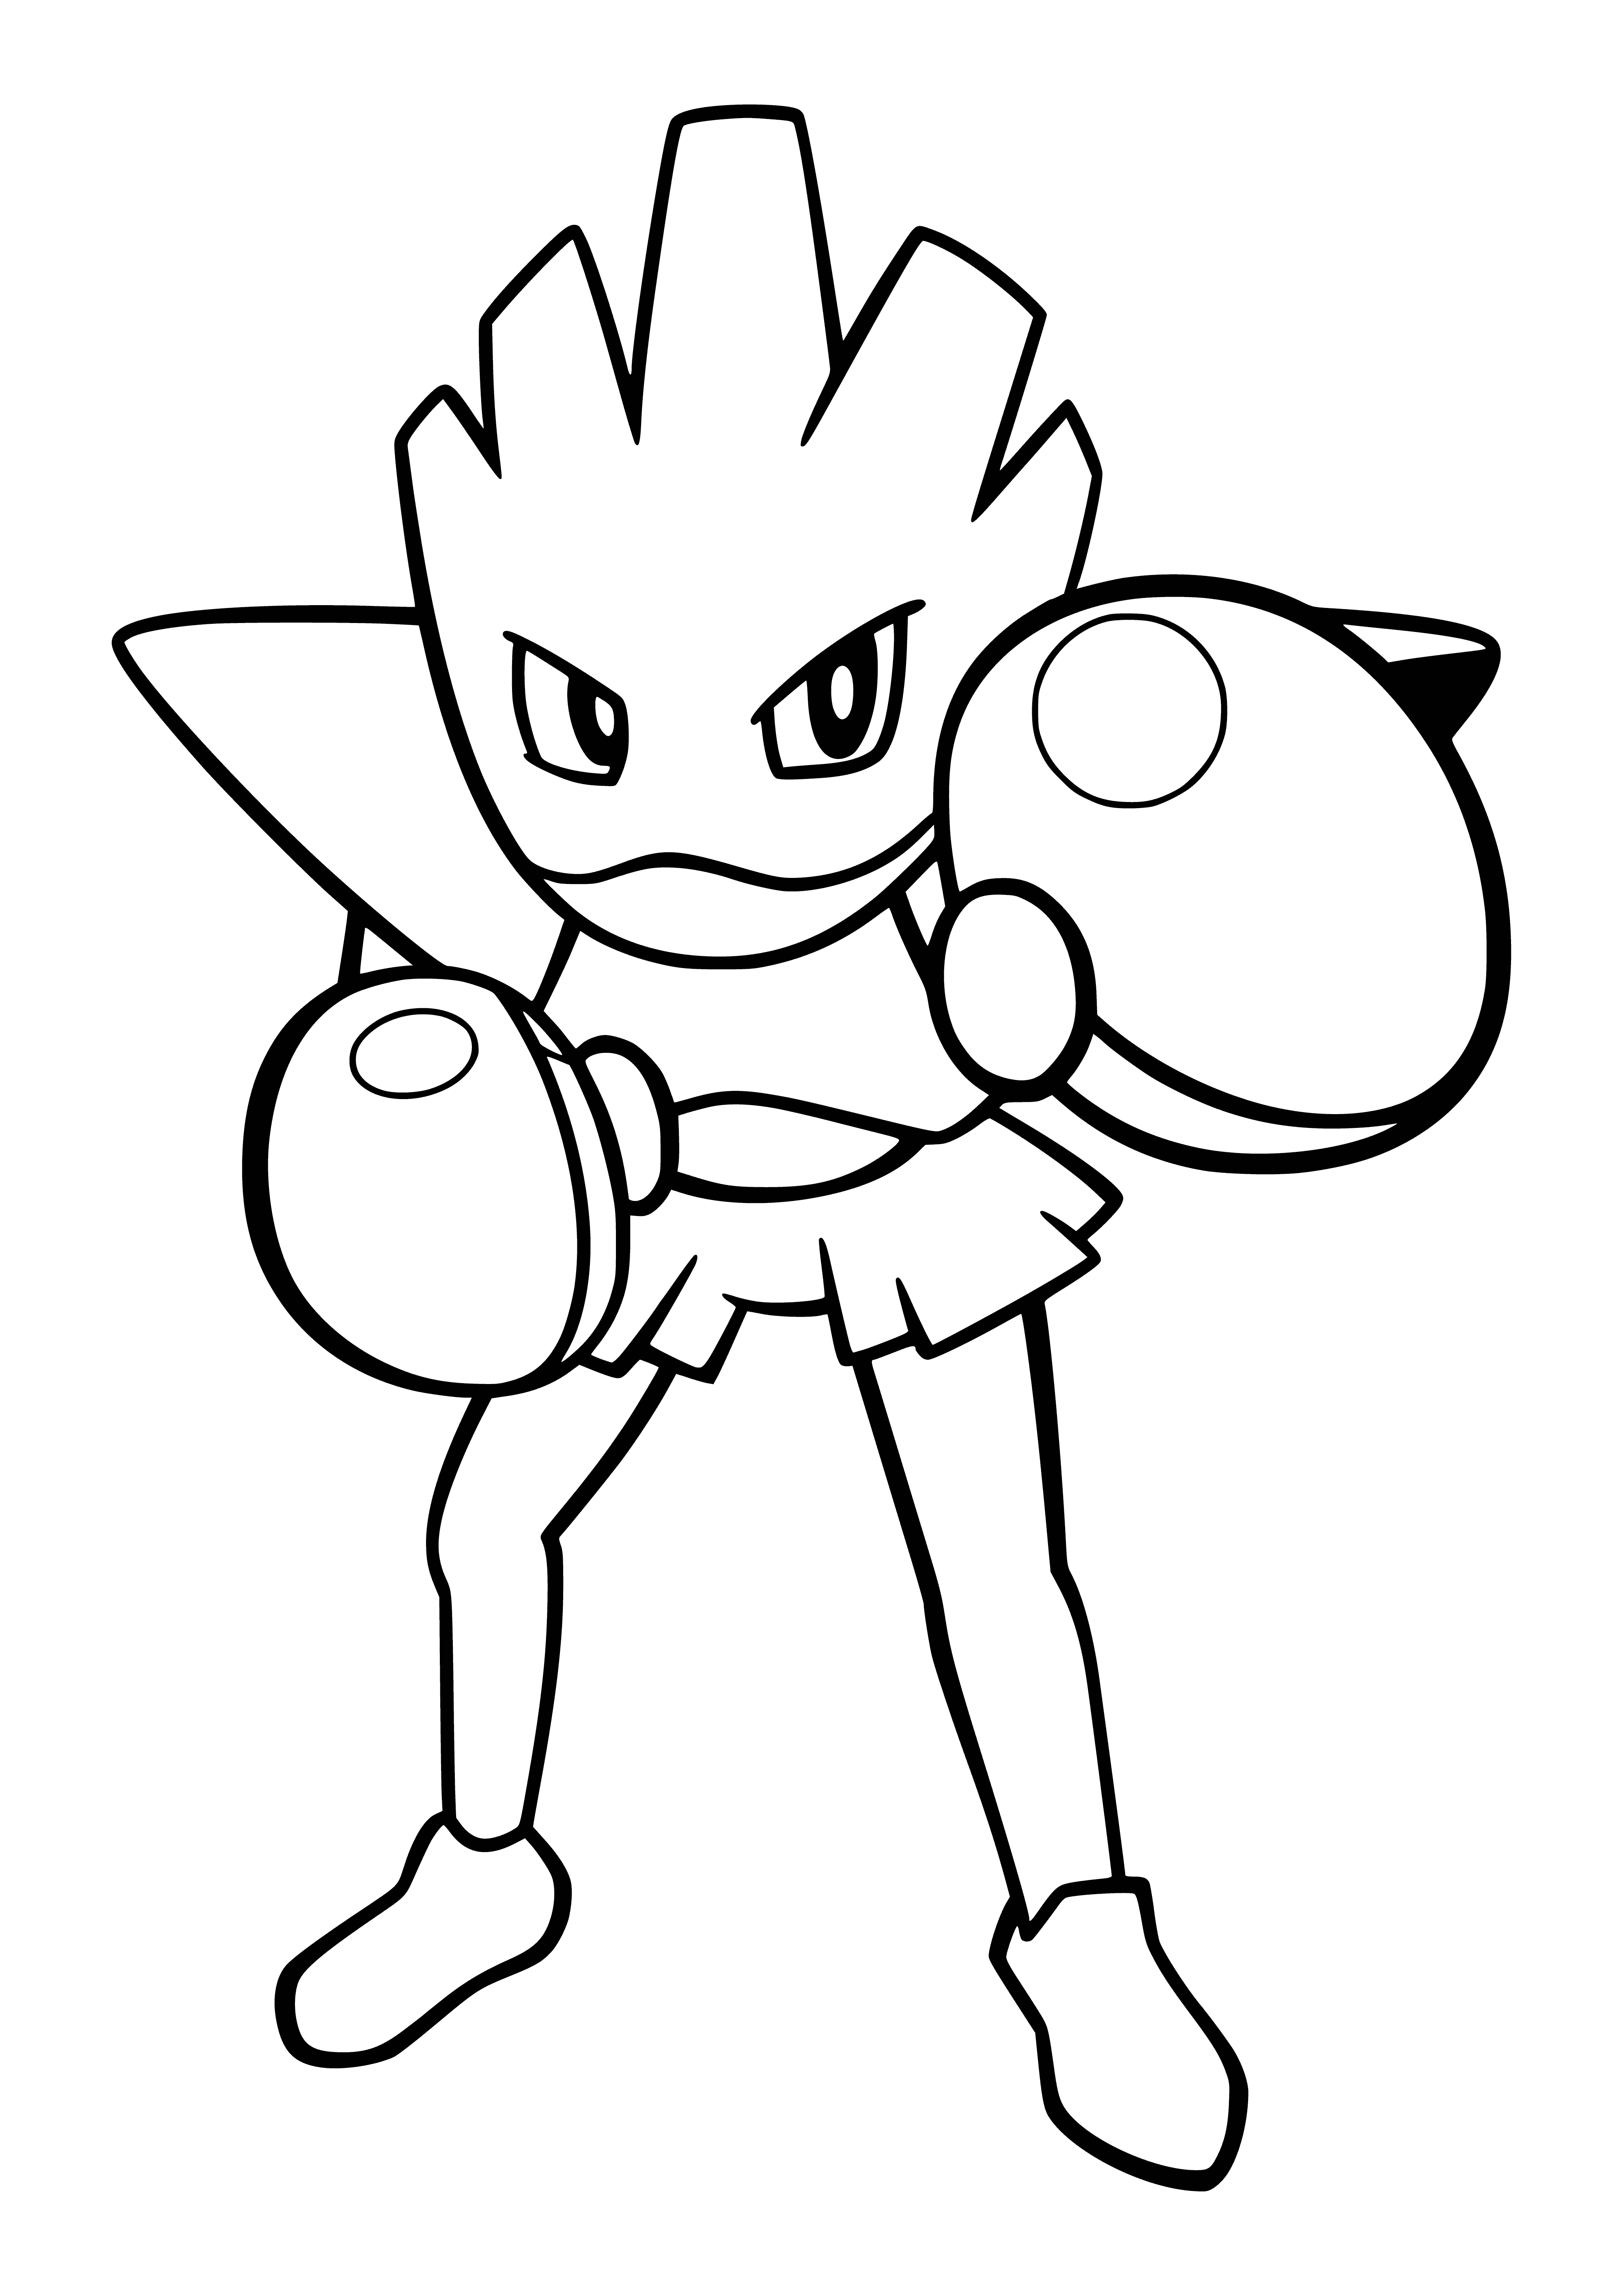 coloring page: A muscular, humanoid Pokémon with brown hair, long tail, red gloves, and shoes shown.